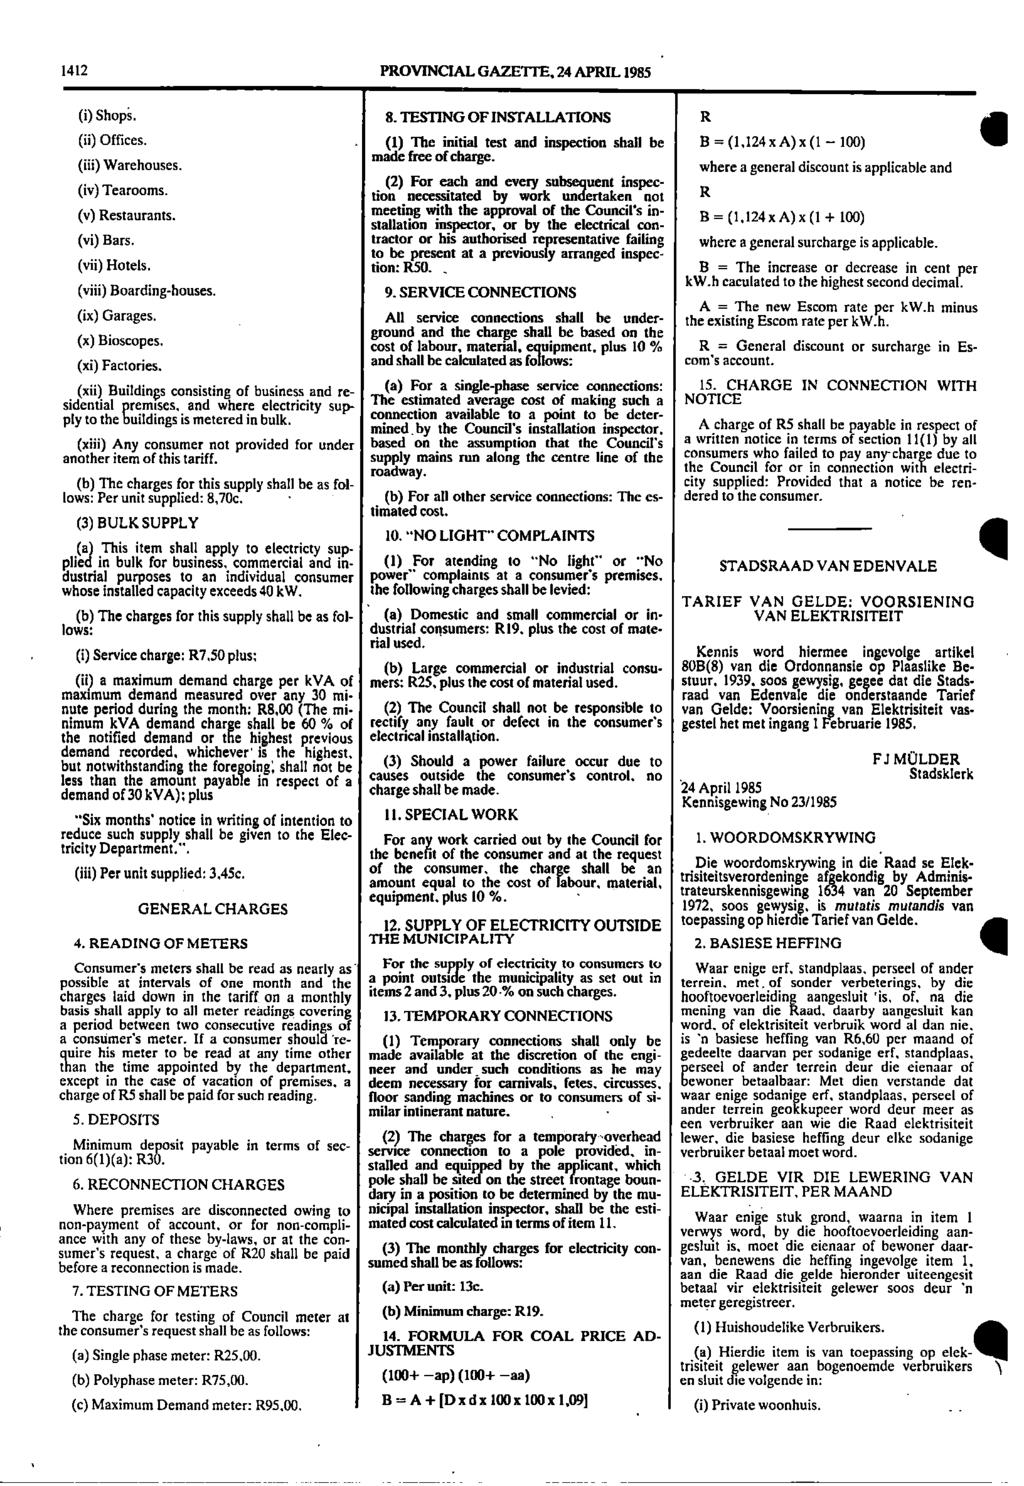 1412 PROVINCIAL GAZETTE, 24 APRIL 1985 (i) Shops 8 TESTING OF INSTALLATIONS R (ii) Offices (1) The initial test and inspection shall be B = (1,124 x A) x (1 100) charge free made of (iii) Warehouses